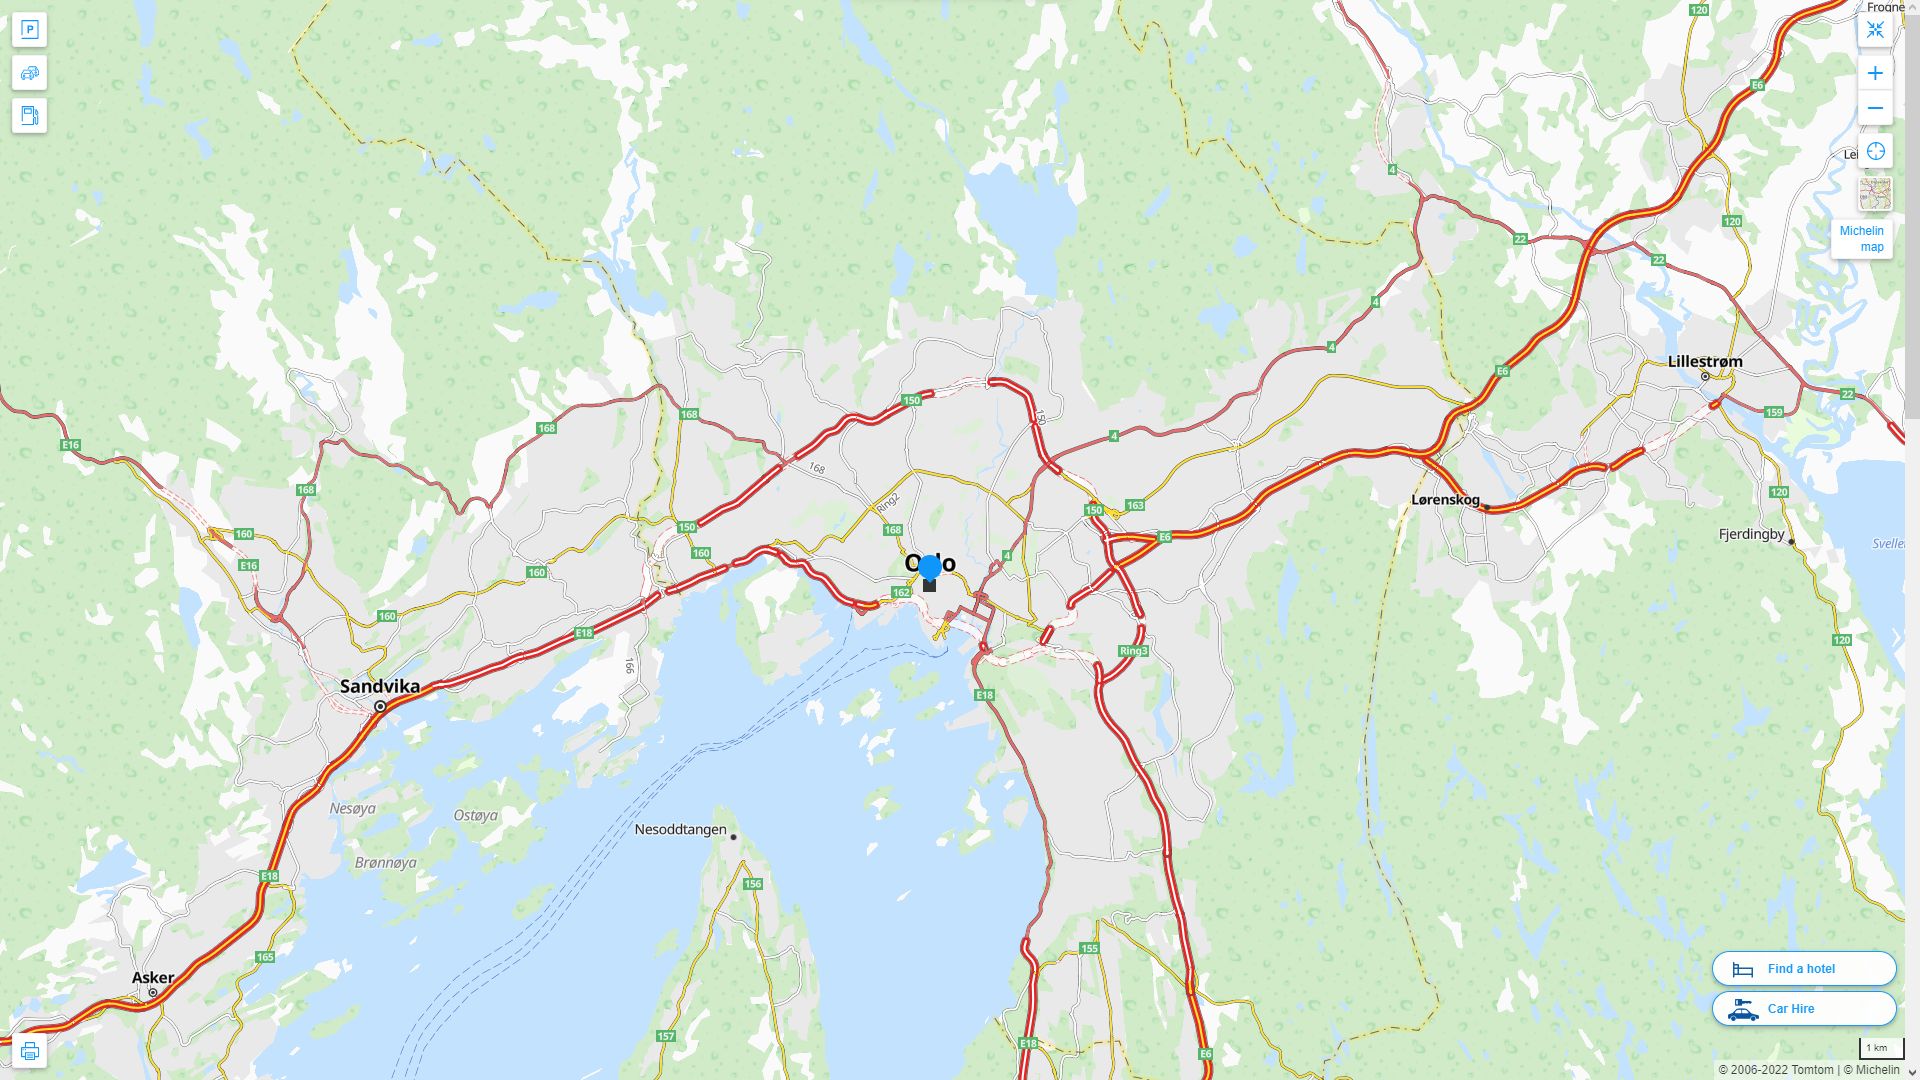 Oslo Highway and Road Map